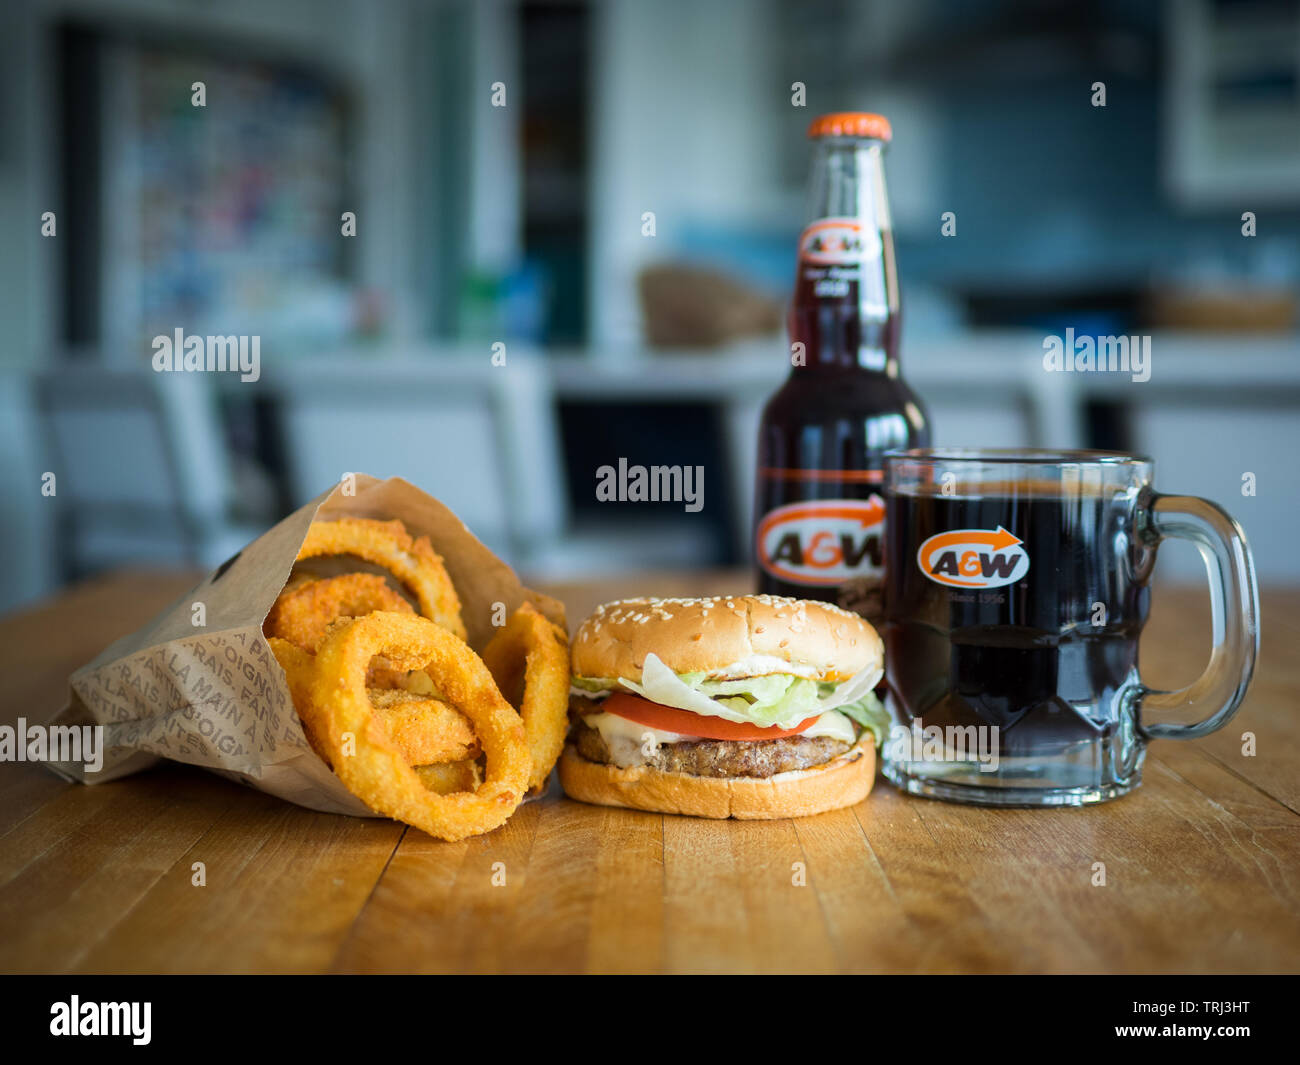 A Mozza Burger, onion rings, and mug of root beer from A&W, a Canadian fast food restaurant. Stock Photo